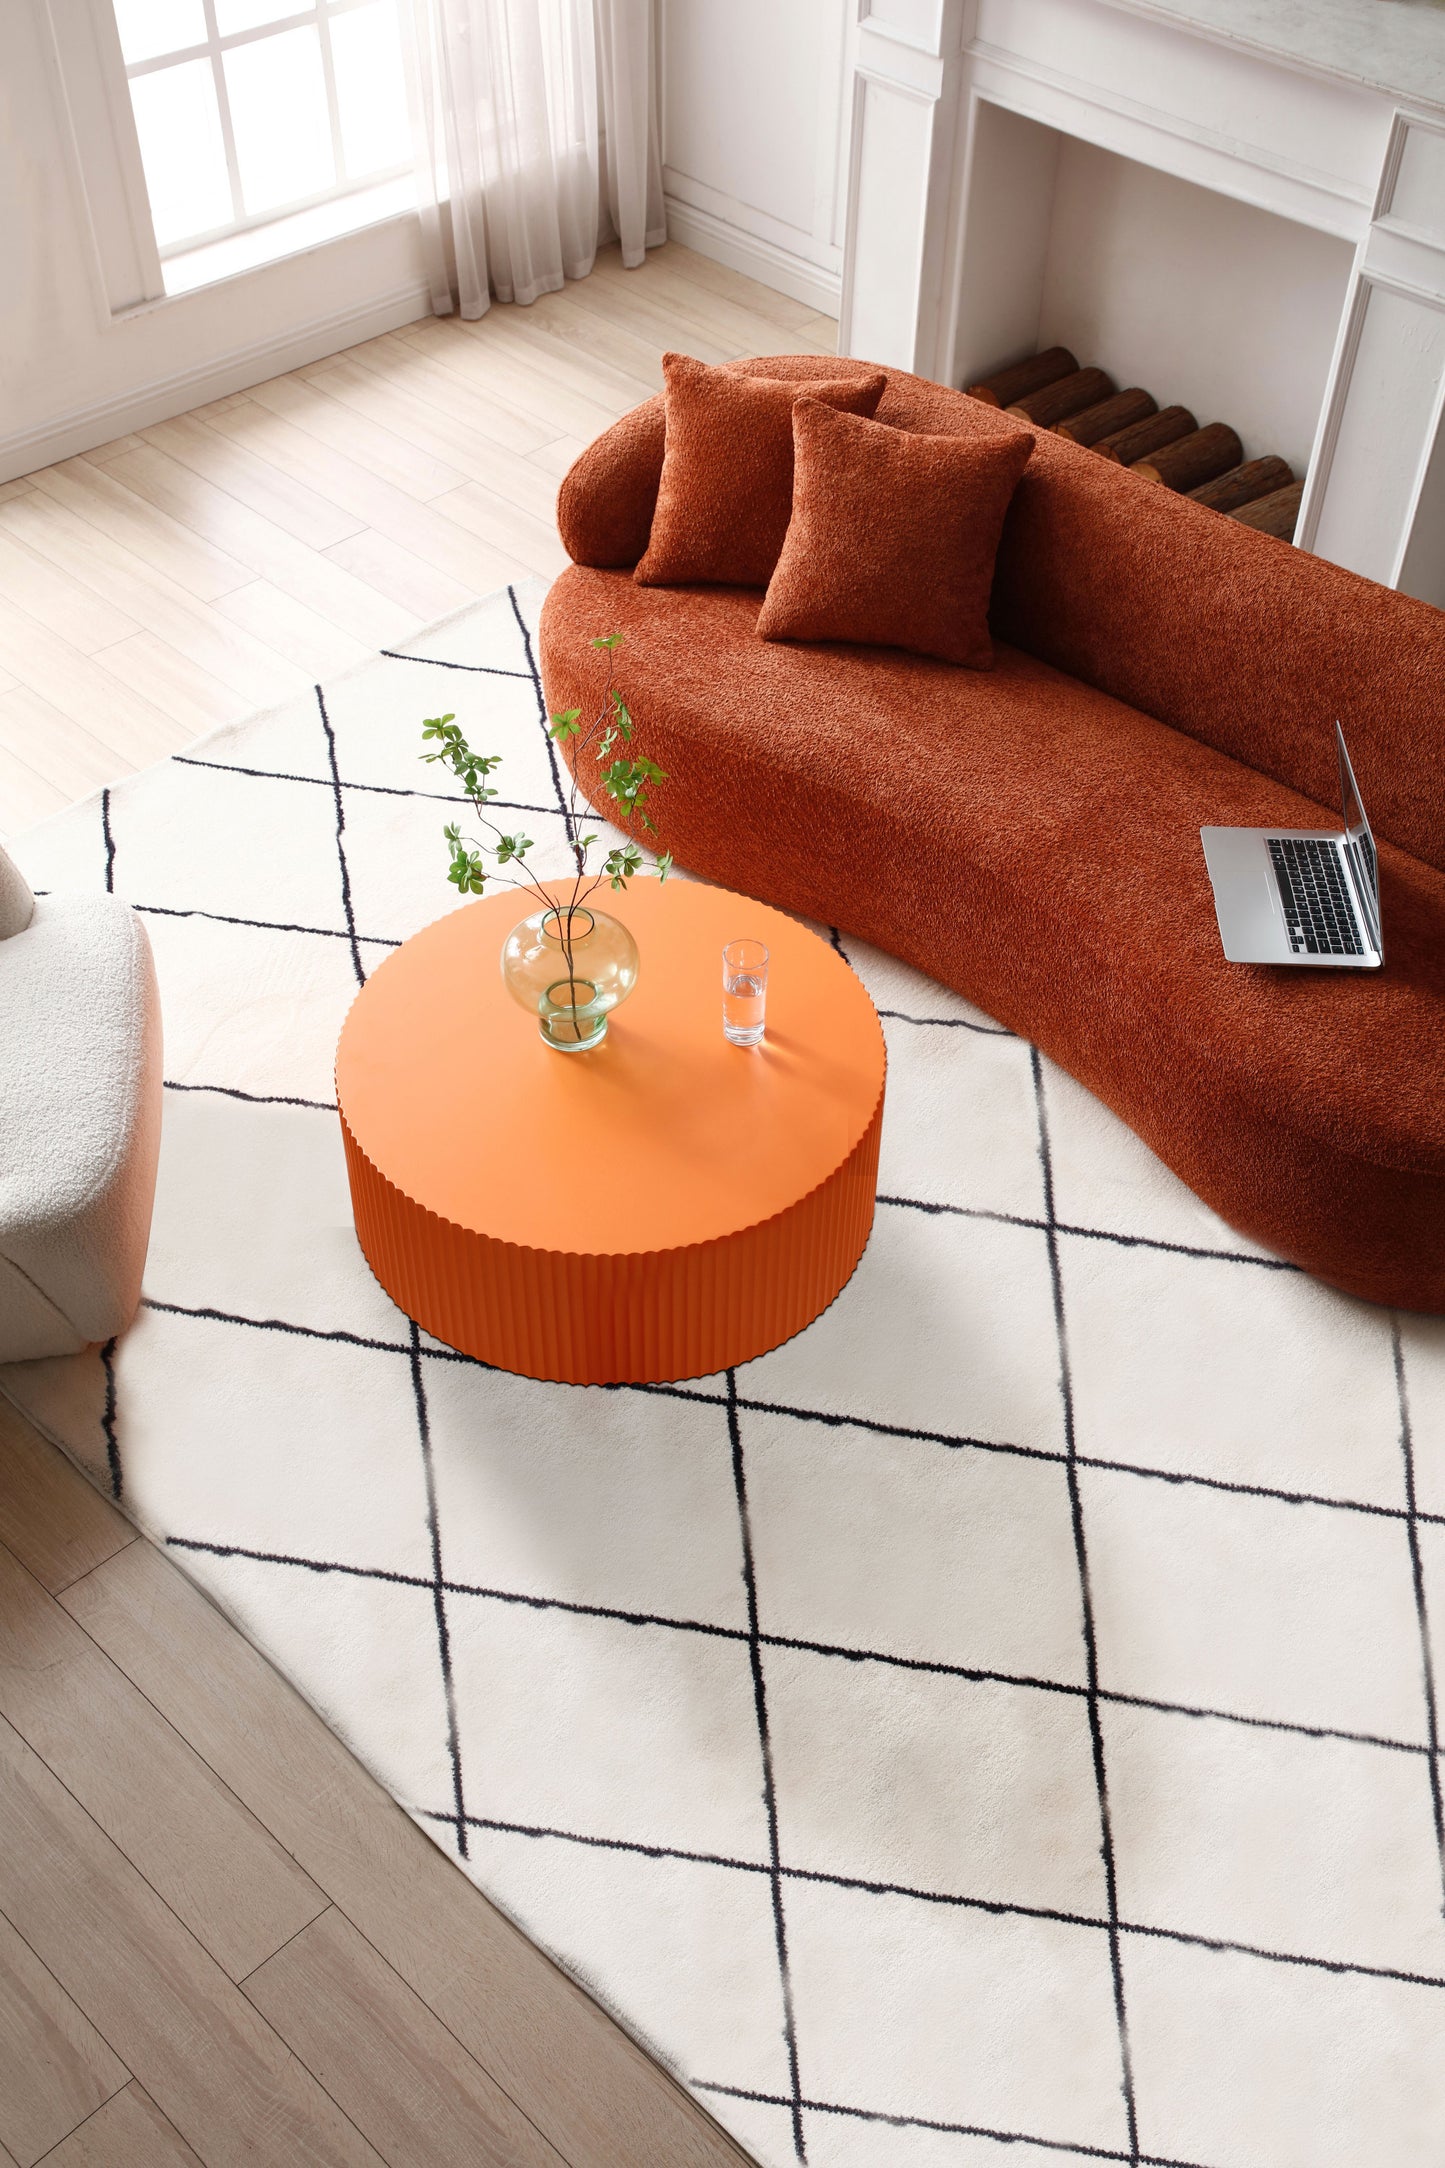 Handcrafted Round MDF Coffee Table with Intricate Relief Design φ35.43inch, Vibrant Orange Color